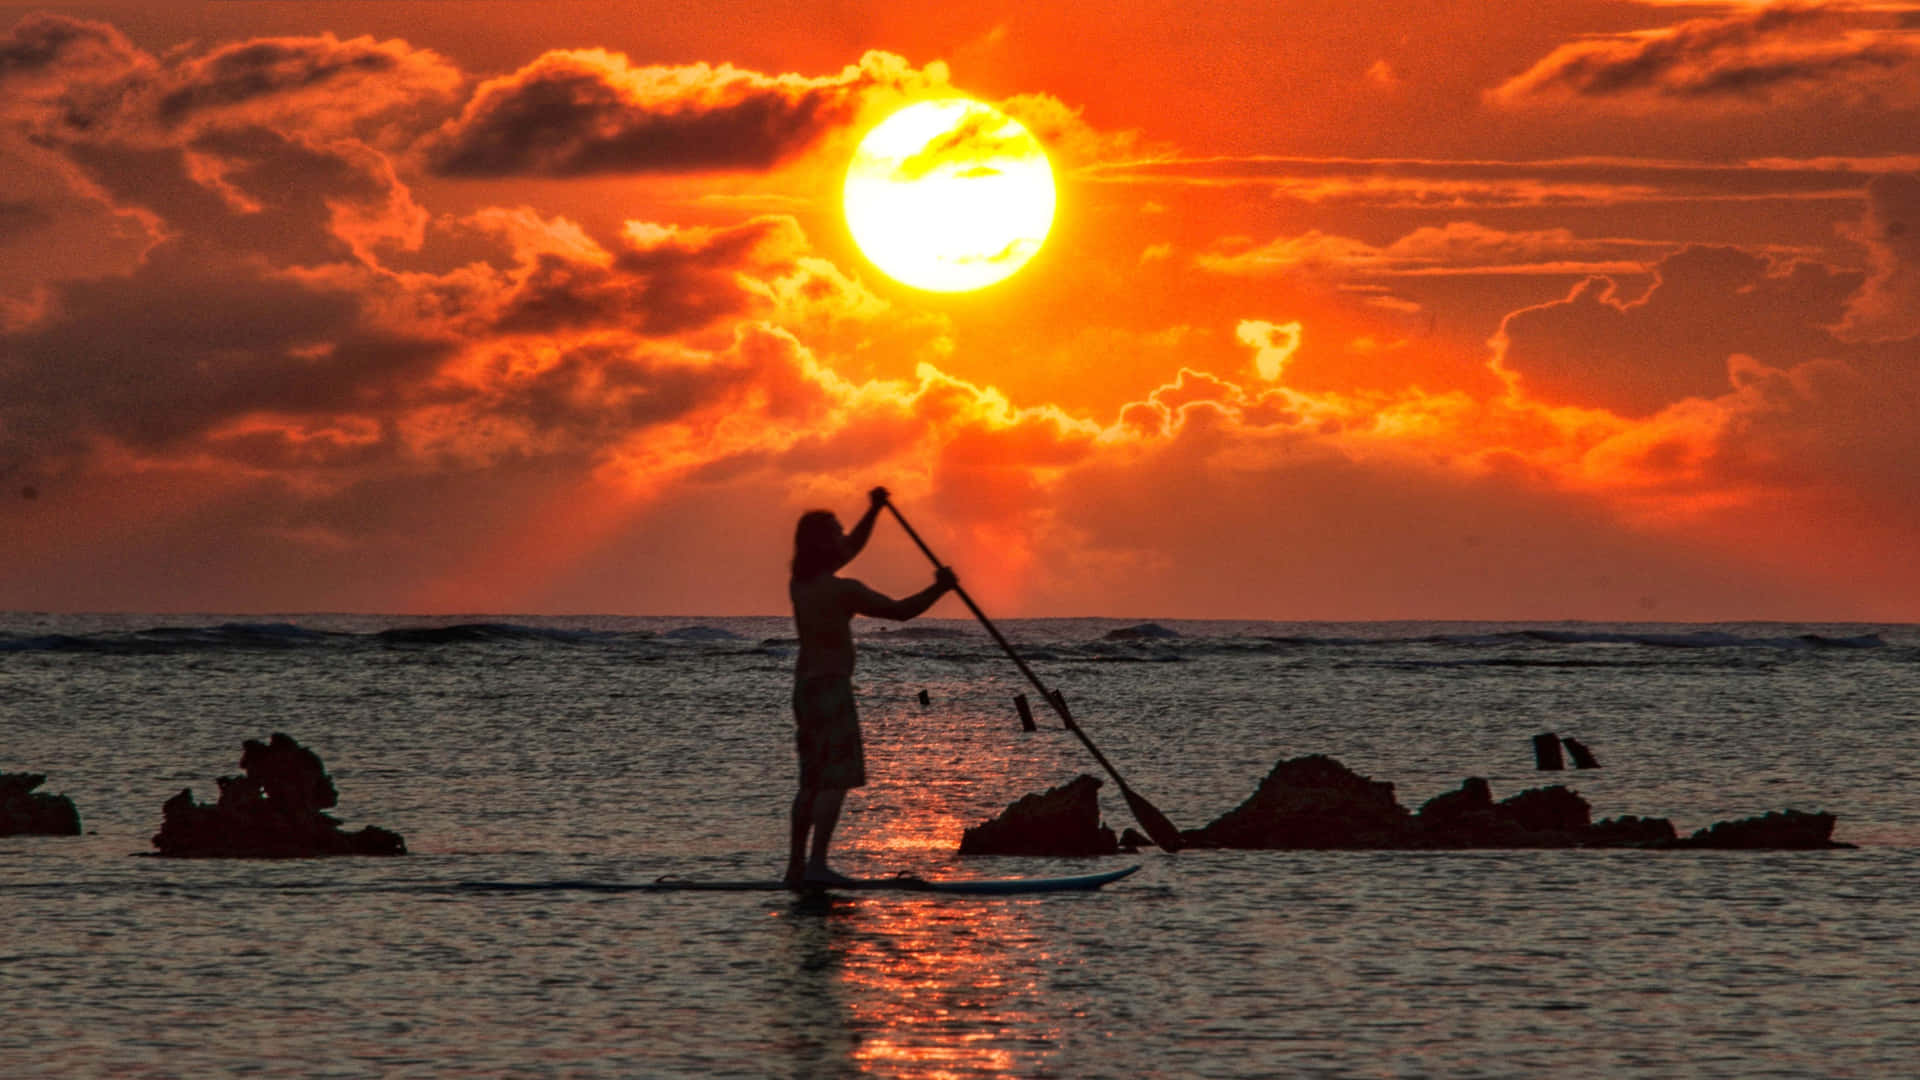 Caption: Exploring the Beauty of the Ocean on a Paddleboard Wallpaper